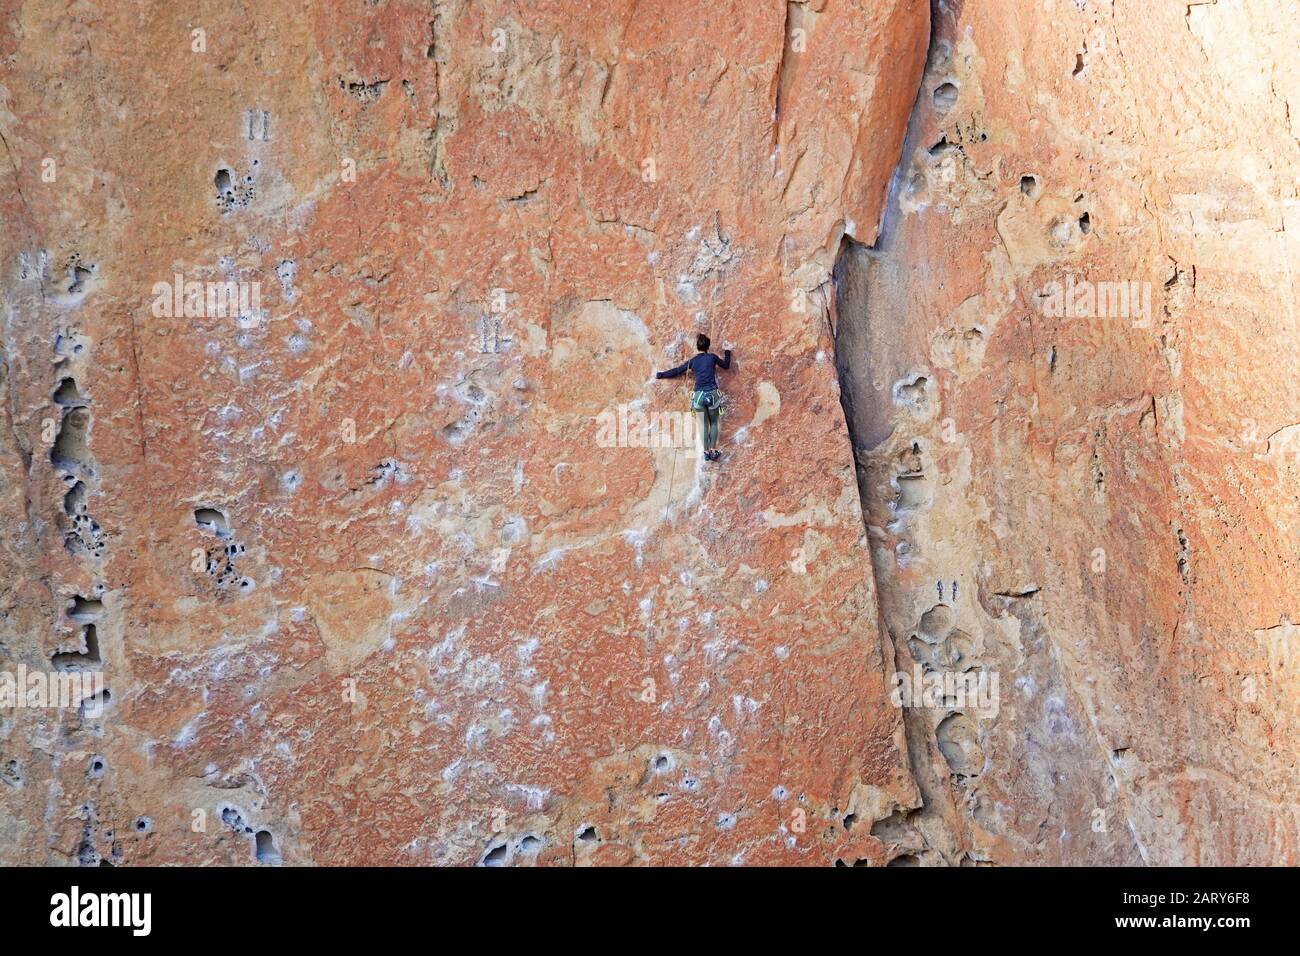 A rock climber negotiates a wall at Smith Rock State Park in Oregon ner the village of Terrebonne. Made of tuff, or hardened volcanic ash, the Rock ha Stock Photo